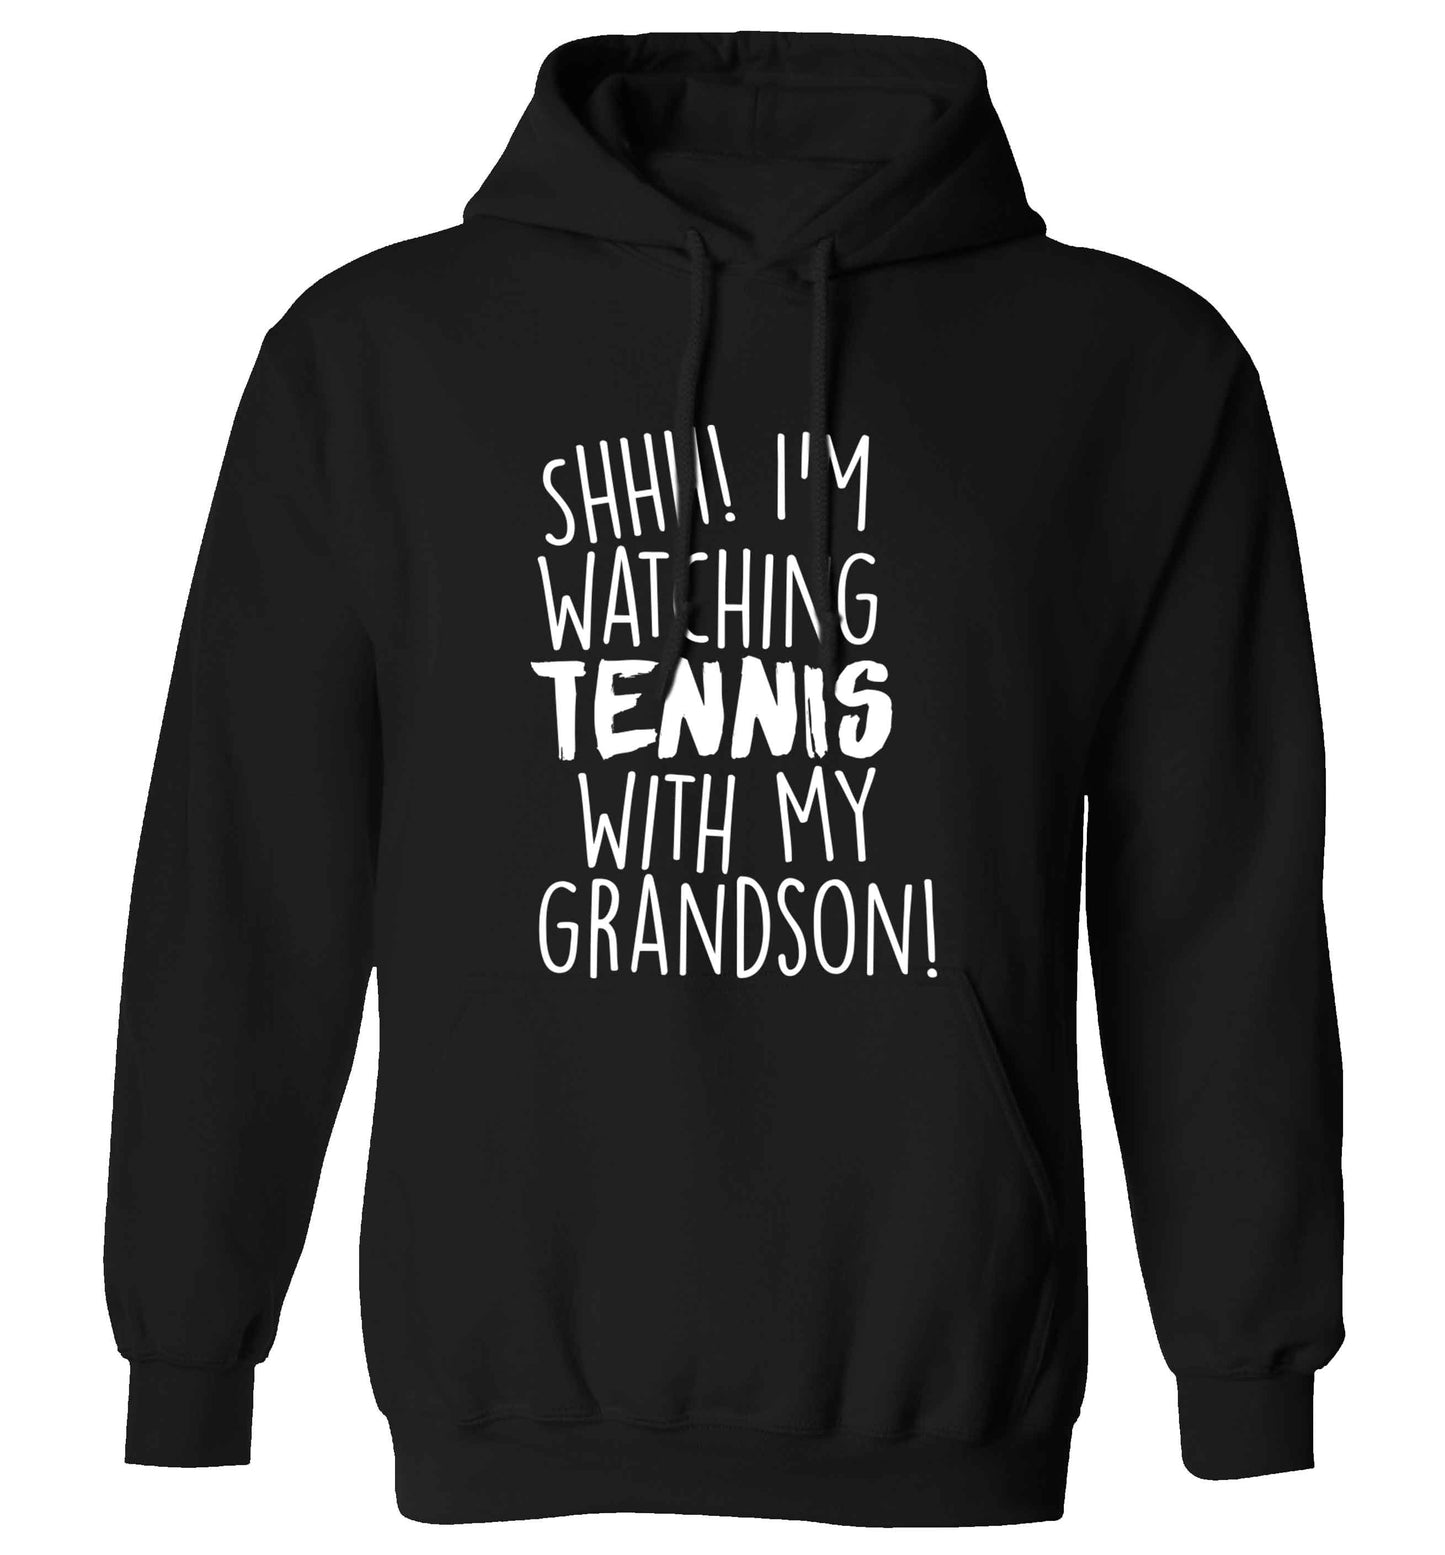 Shh! I'm watching tennis with my grandson! adults unisex black hoodie 2XL